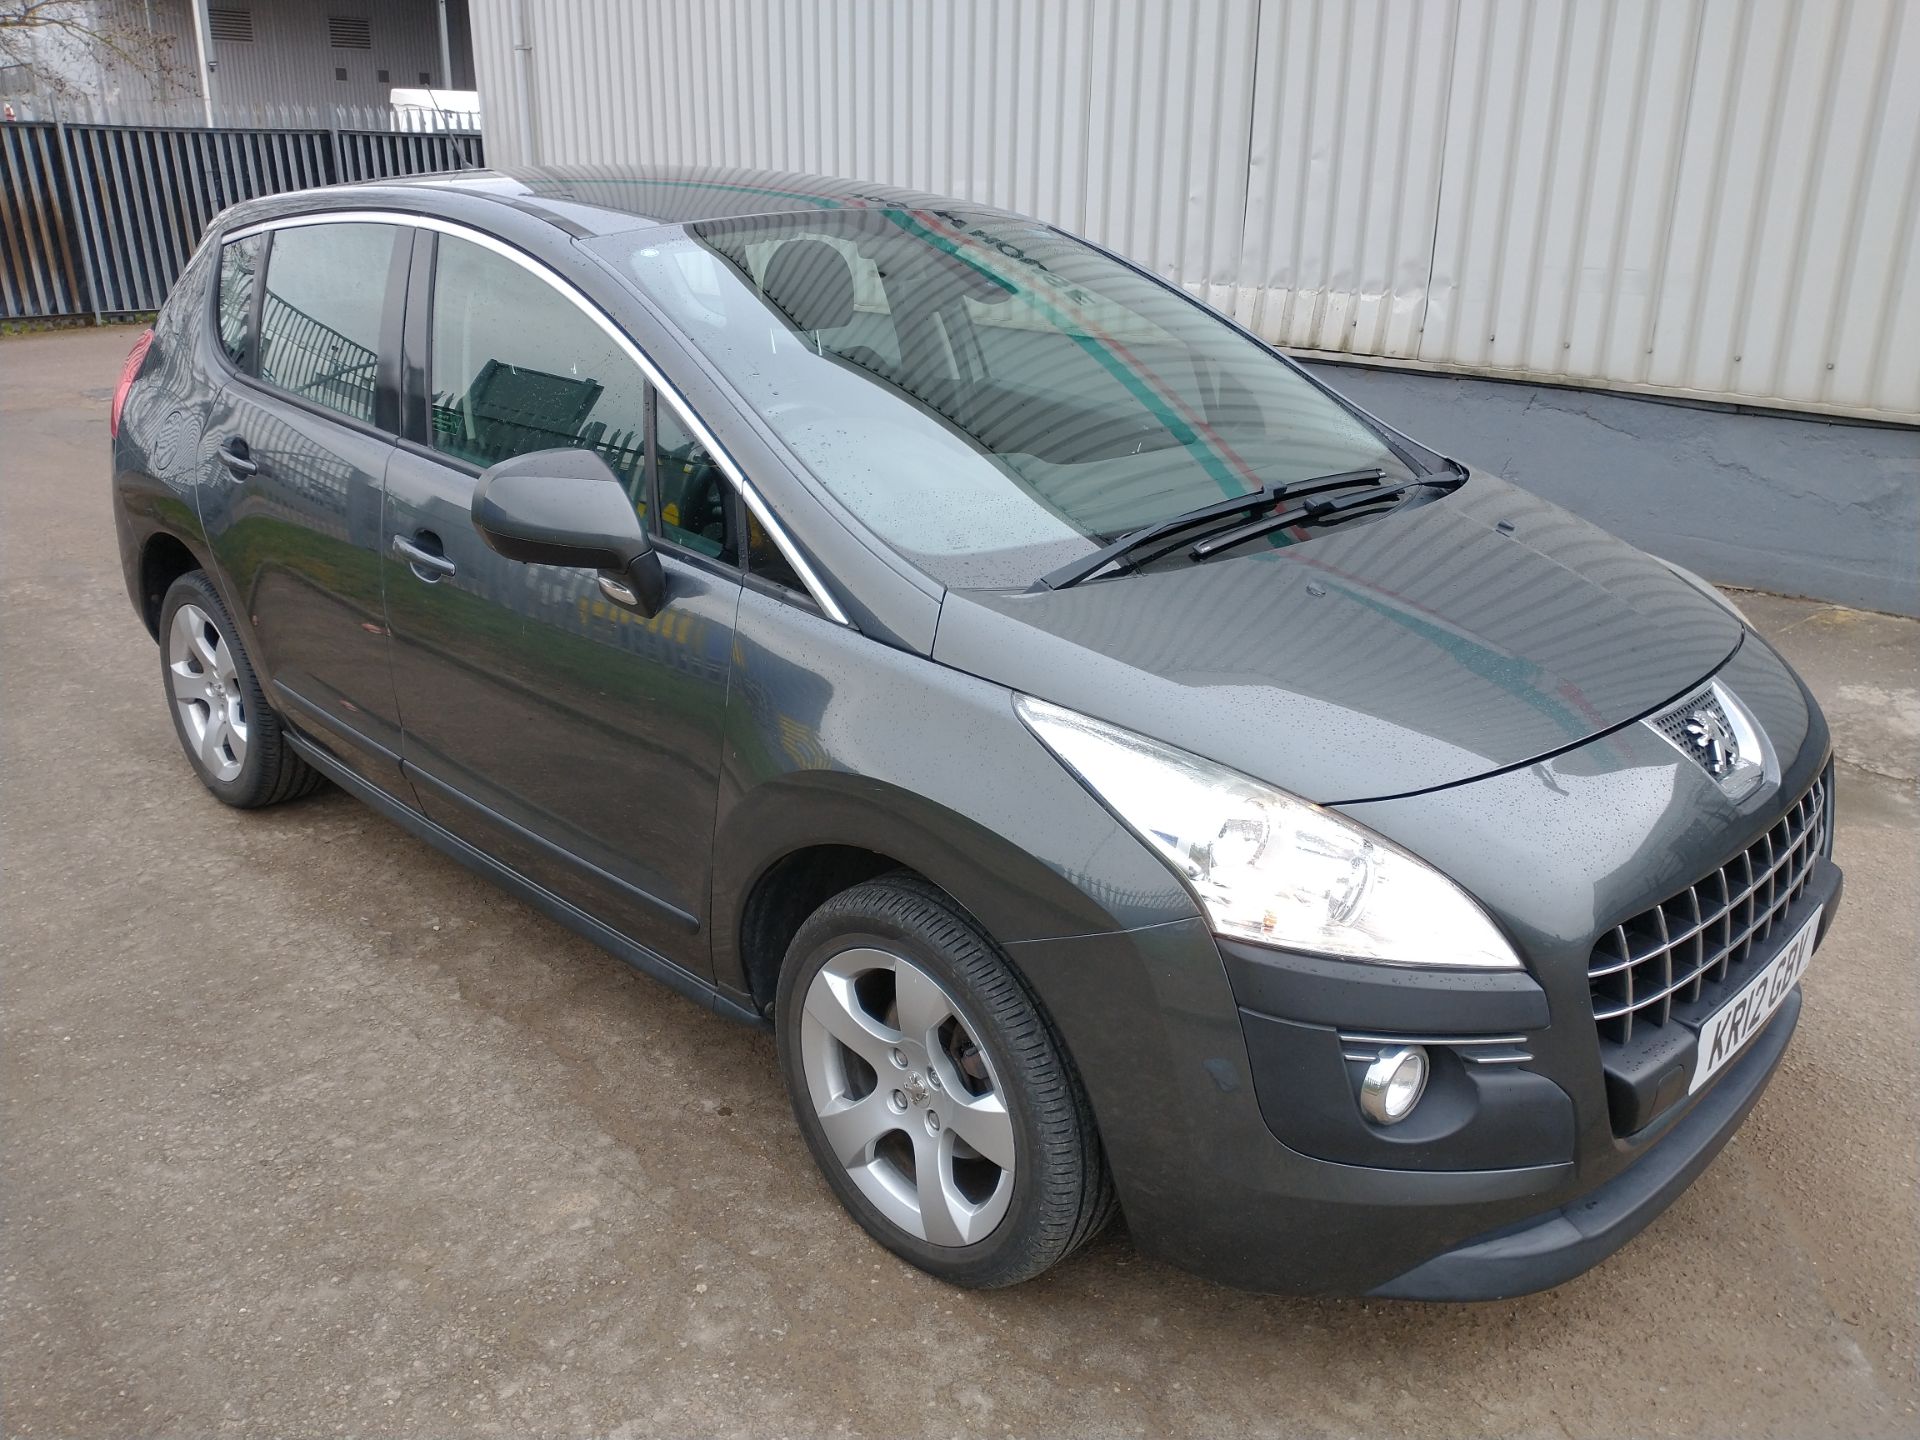 2012 Peugeot 3008 Active HDI 1.6 5DR SUV - CL505 - NO VAT ON THE HAMM - Image 6 of 19